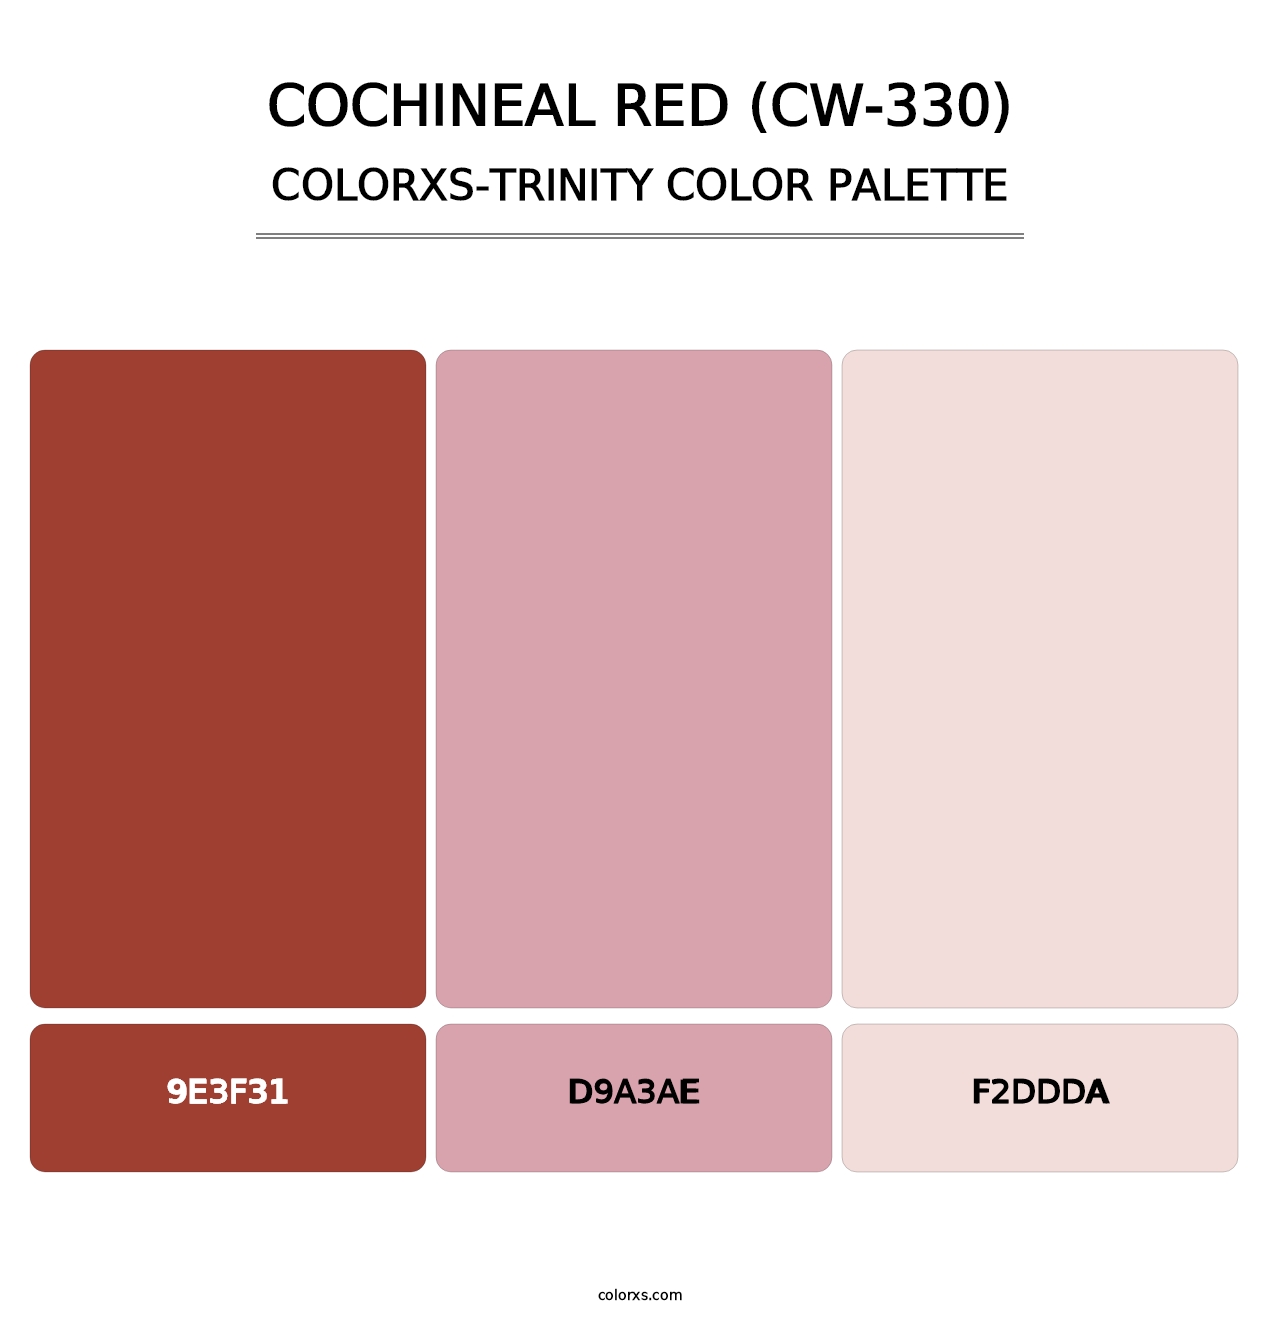 Cochineal Red (CW-330) - Colorxs Trinity Palette